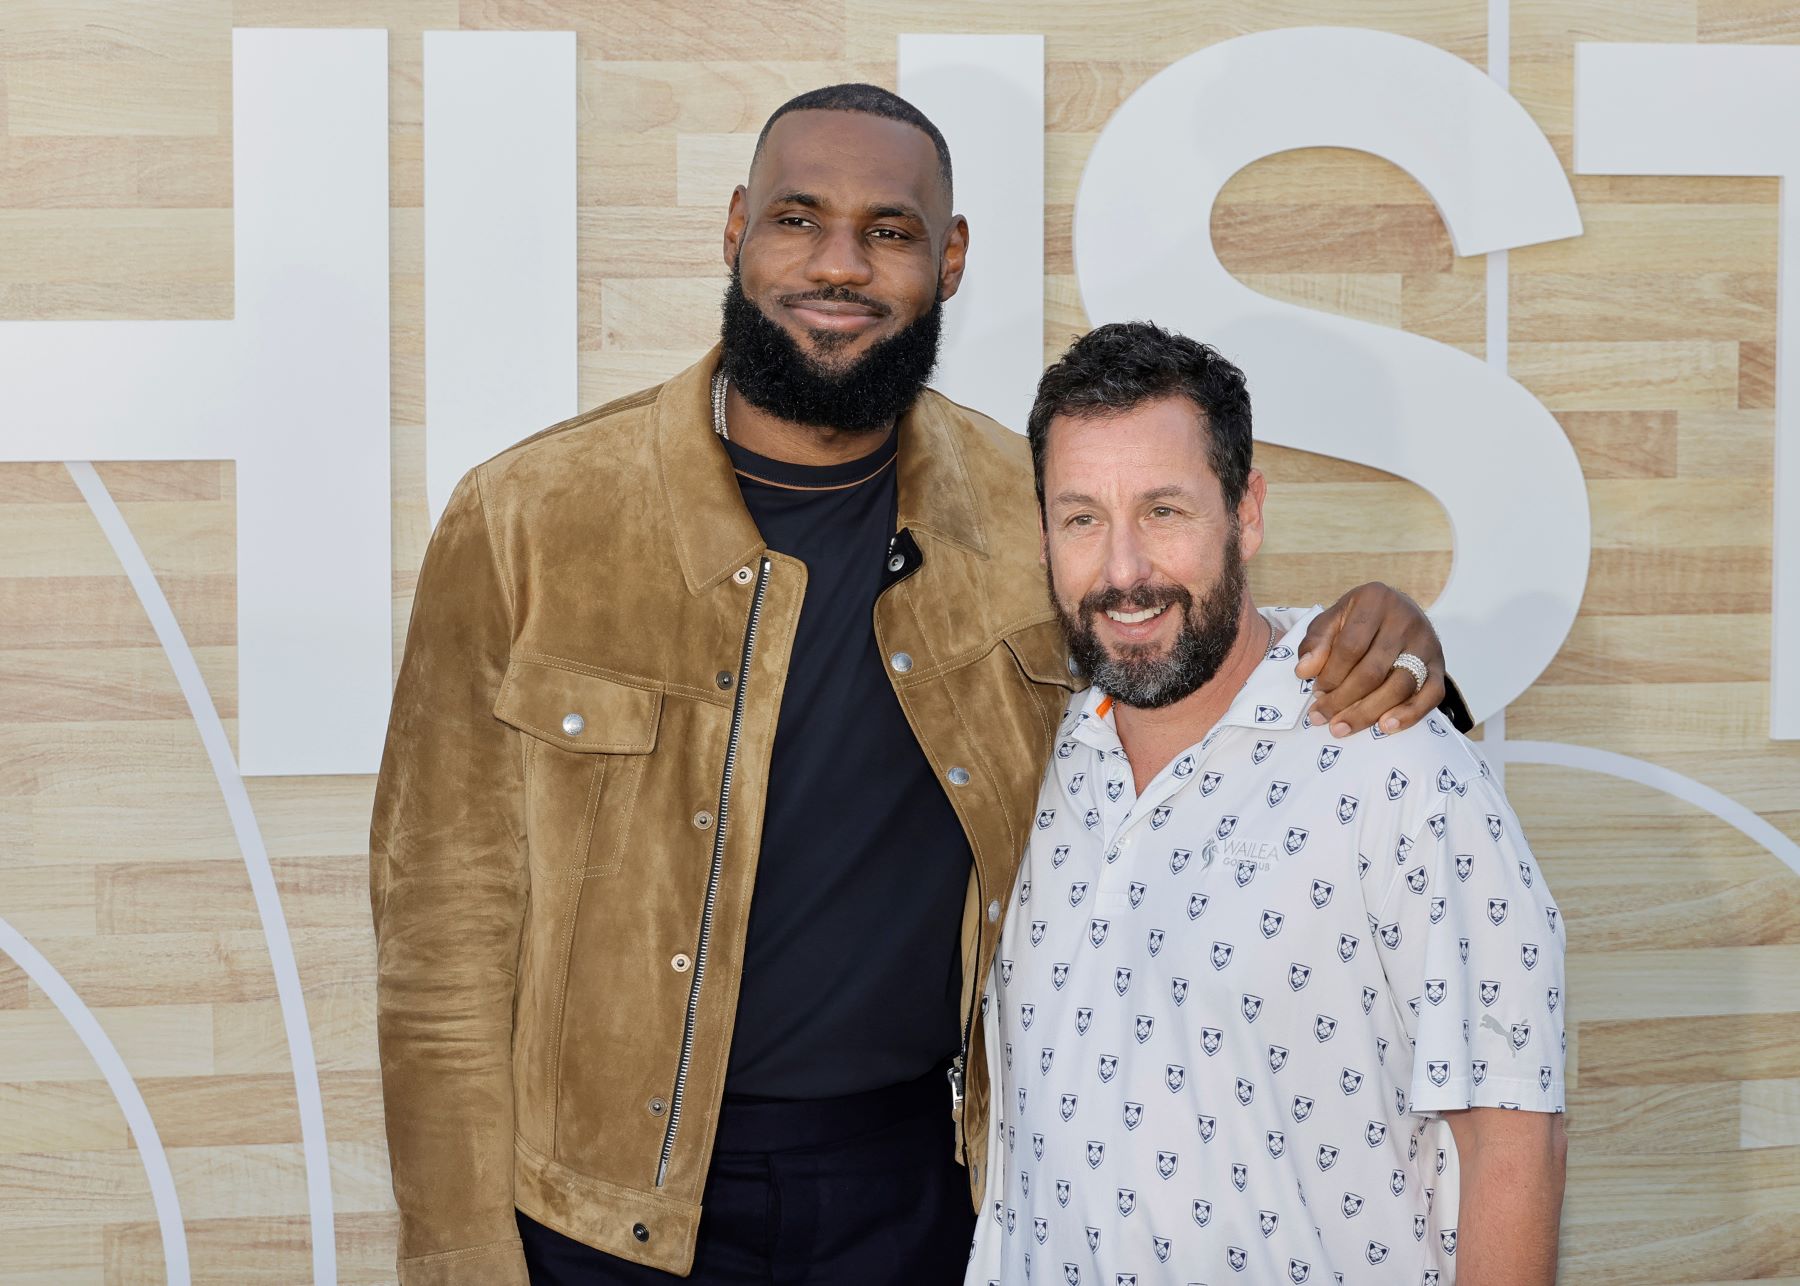 LeBron James and Adam Sandler at the 'Hustle' premiere at the Regency Village in Los Angeles, California